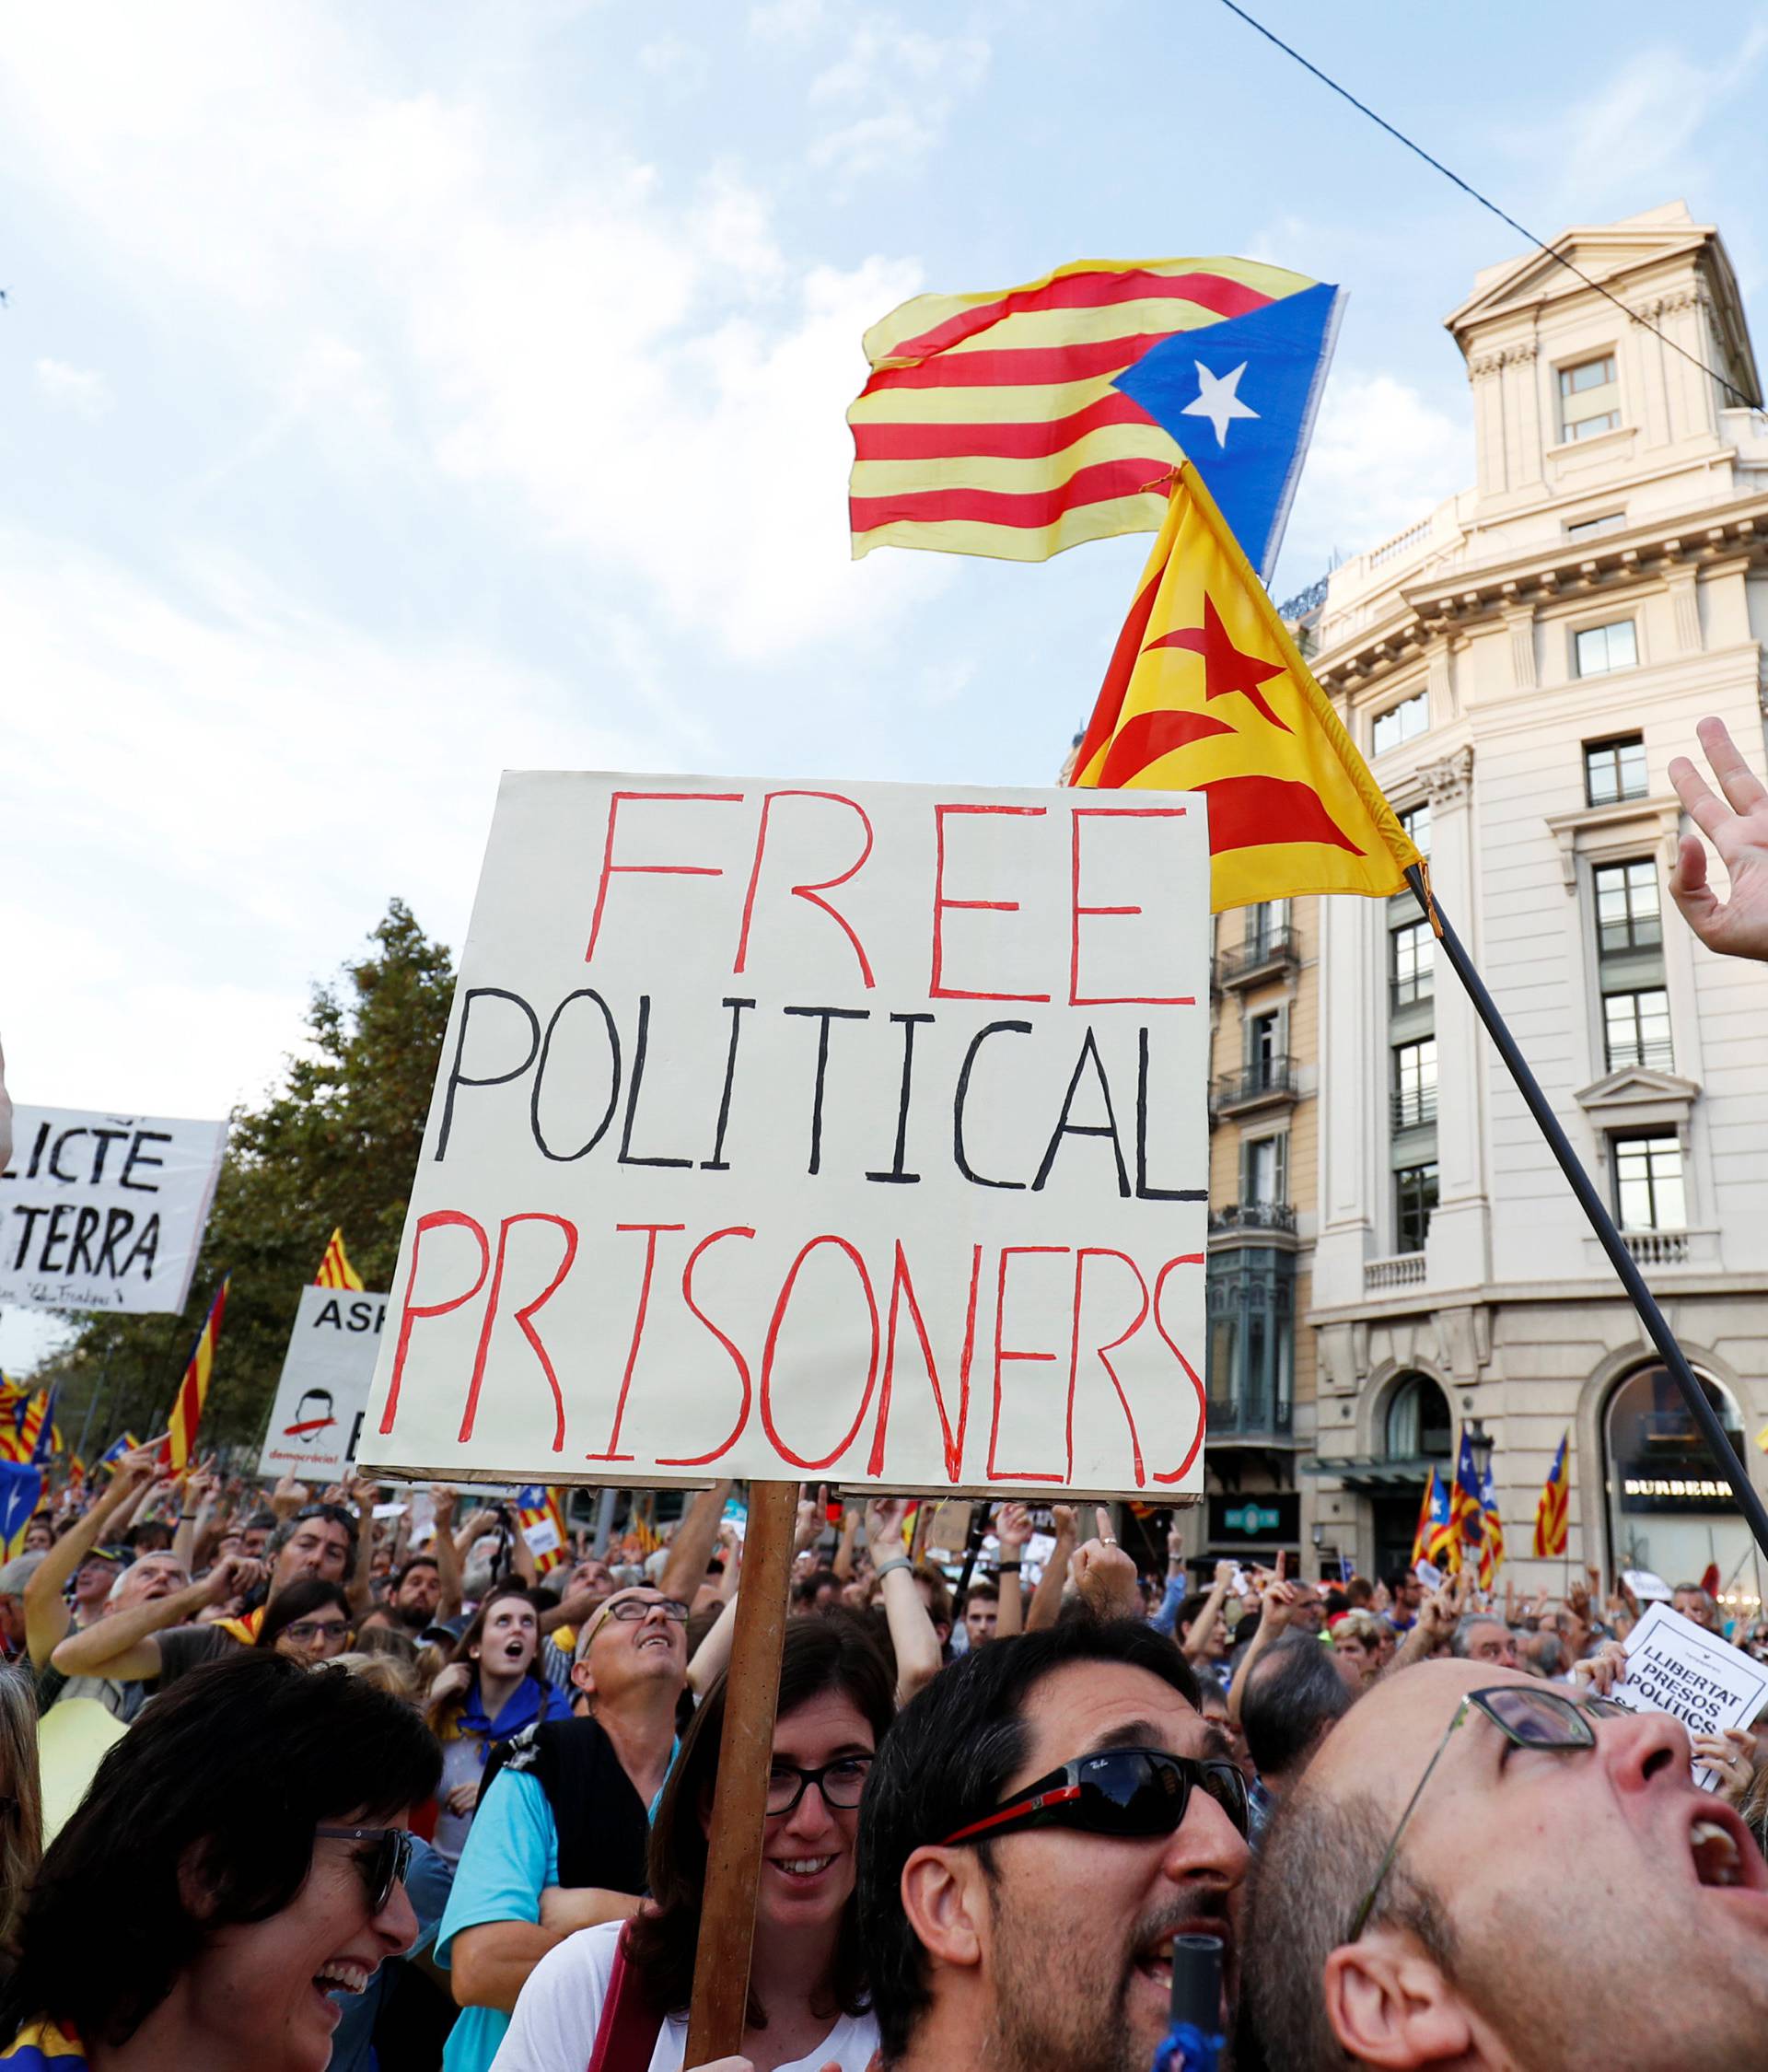 People wave placards and separatist Catalan flags during a demonstration organised by Catalan pro-independence movements ANC (Catalan National Assembly) and Omnium Cutural, following the imprisonment of their two leaders, in